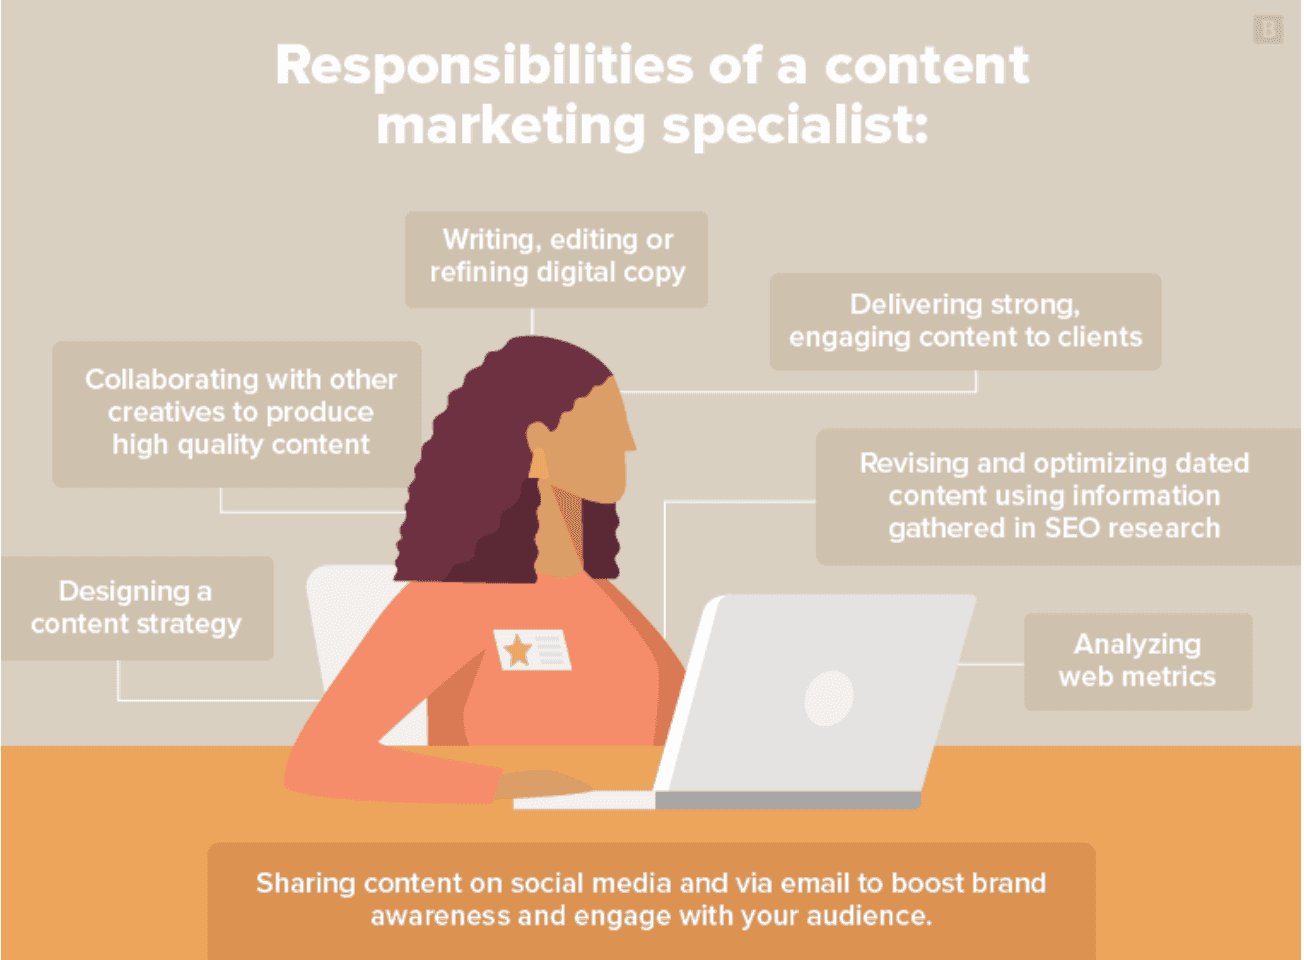 6 different responsibilities that content marketing specialists may have. Some examples include analyzing web metrics, designing a content strategy, or writing, editing a digital copy.